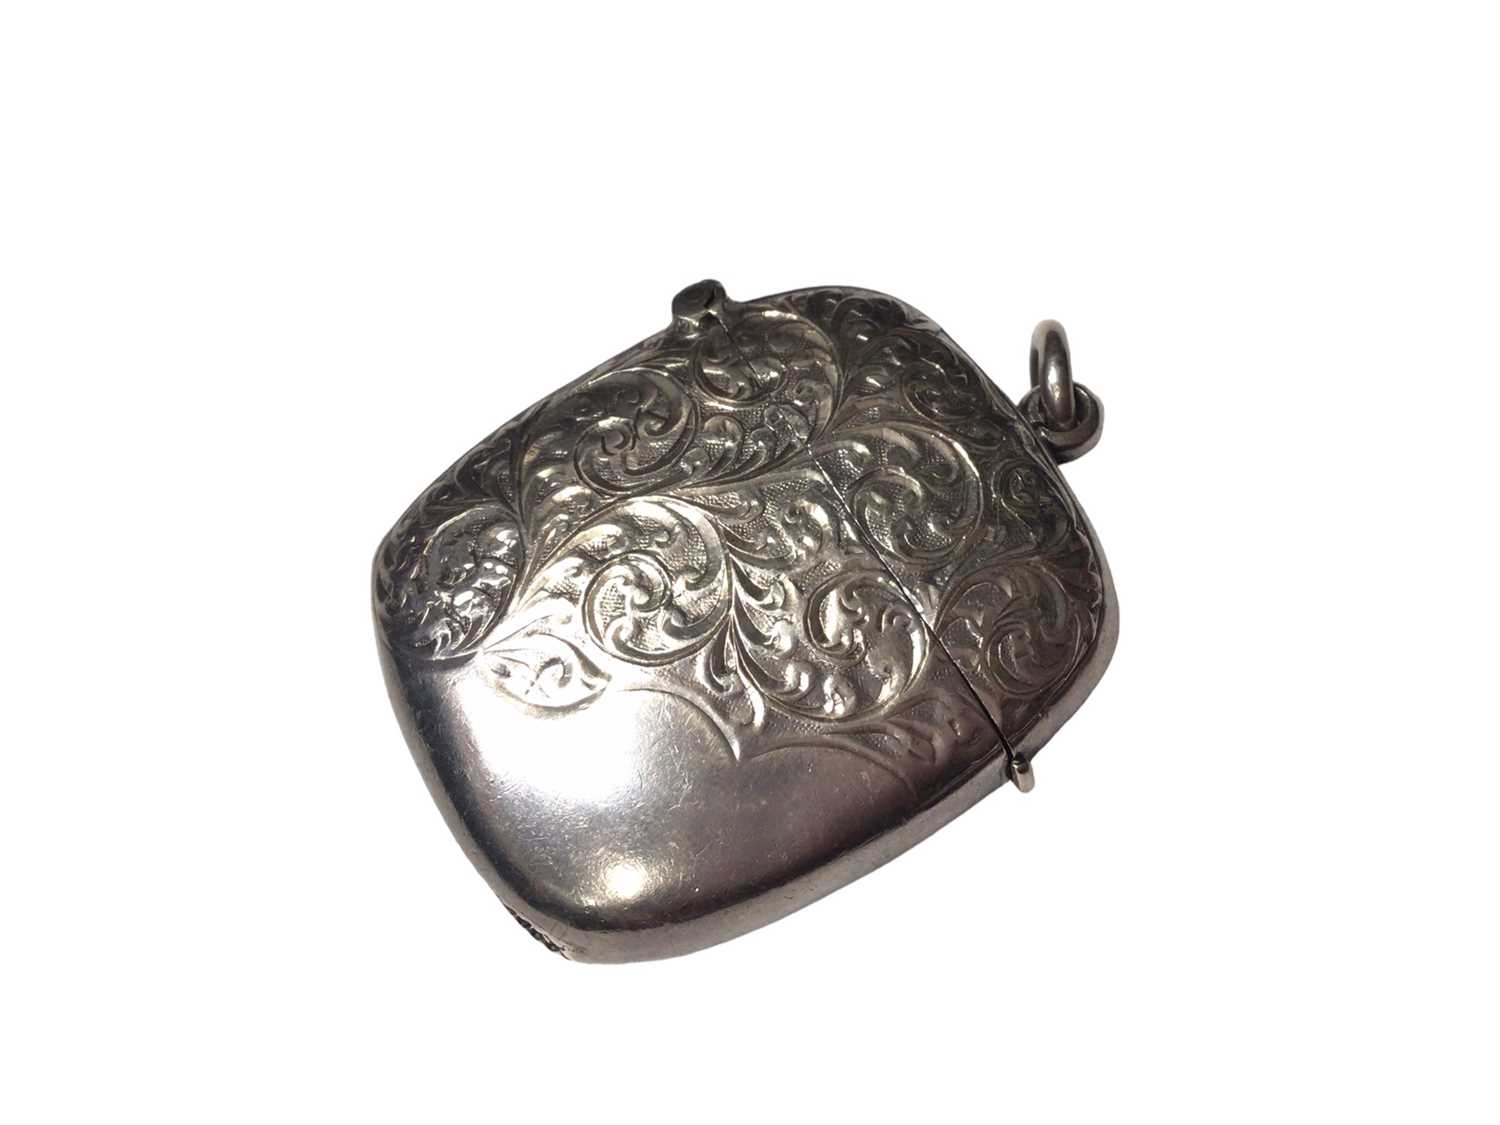 Late Victorian silver heart shaped scent bottle with engraved foliate decoration by Sampson Mordan, - Image 6 of 7